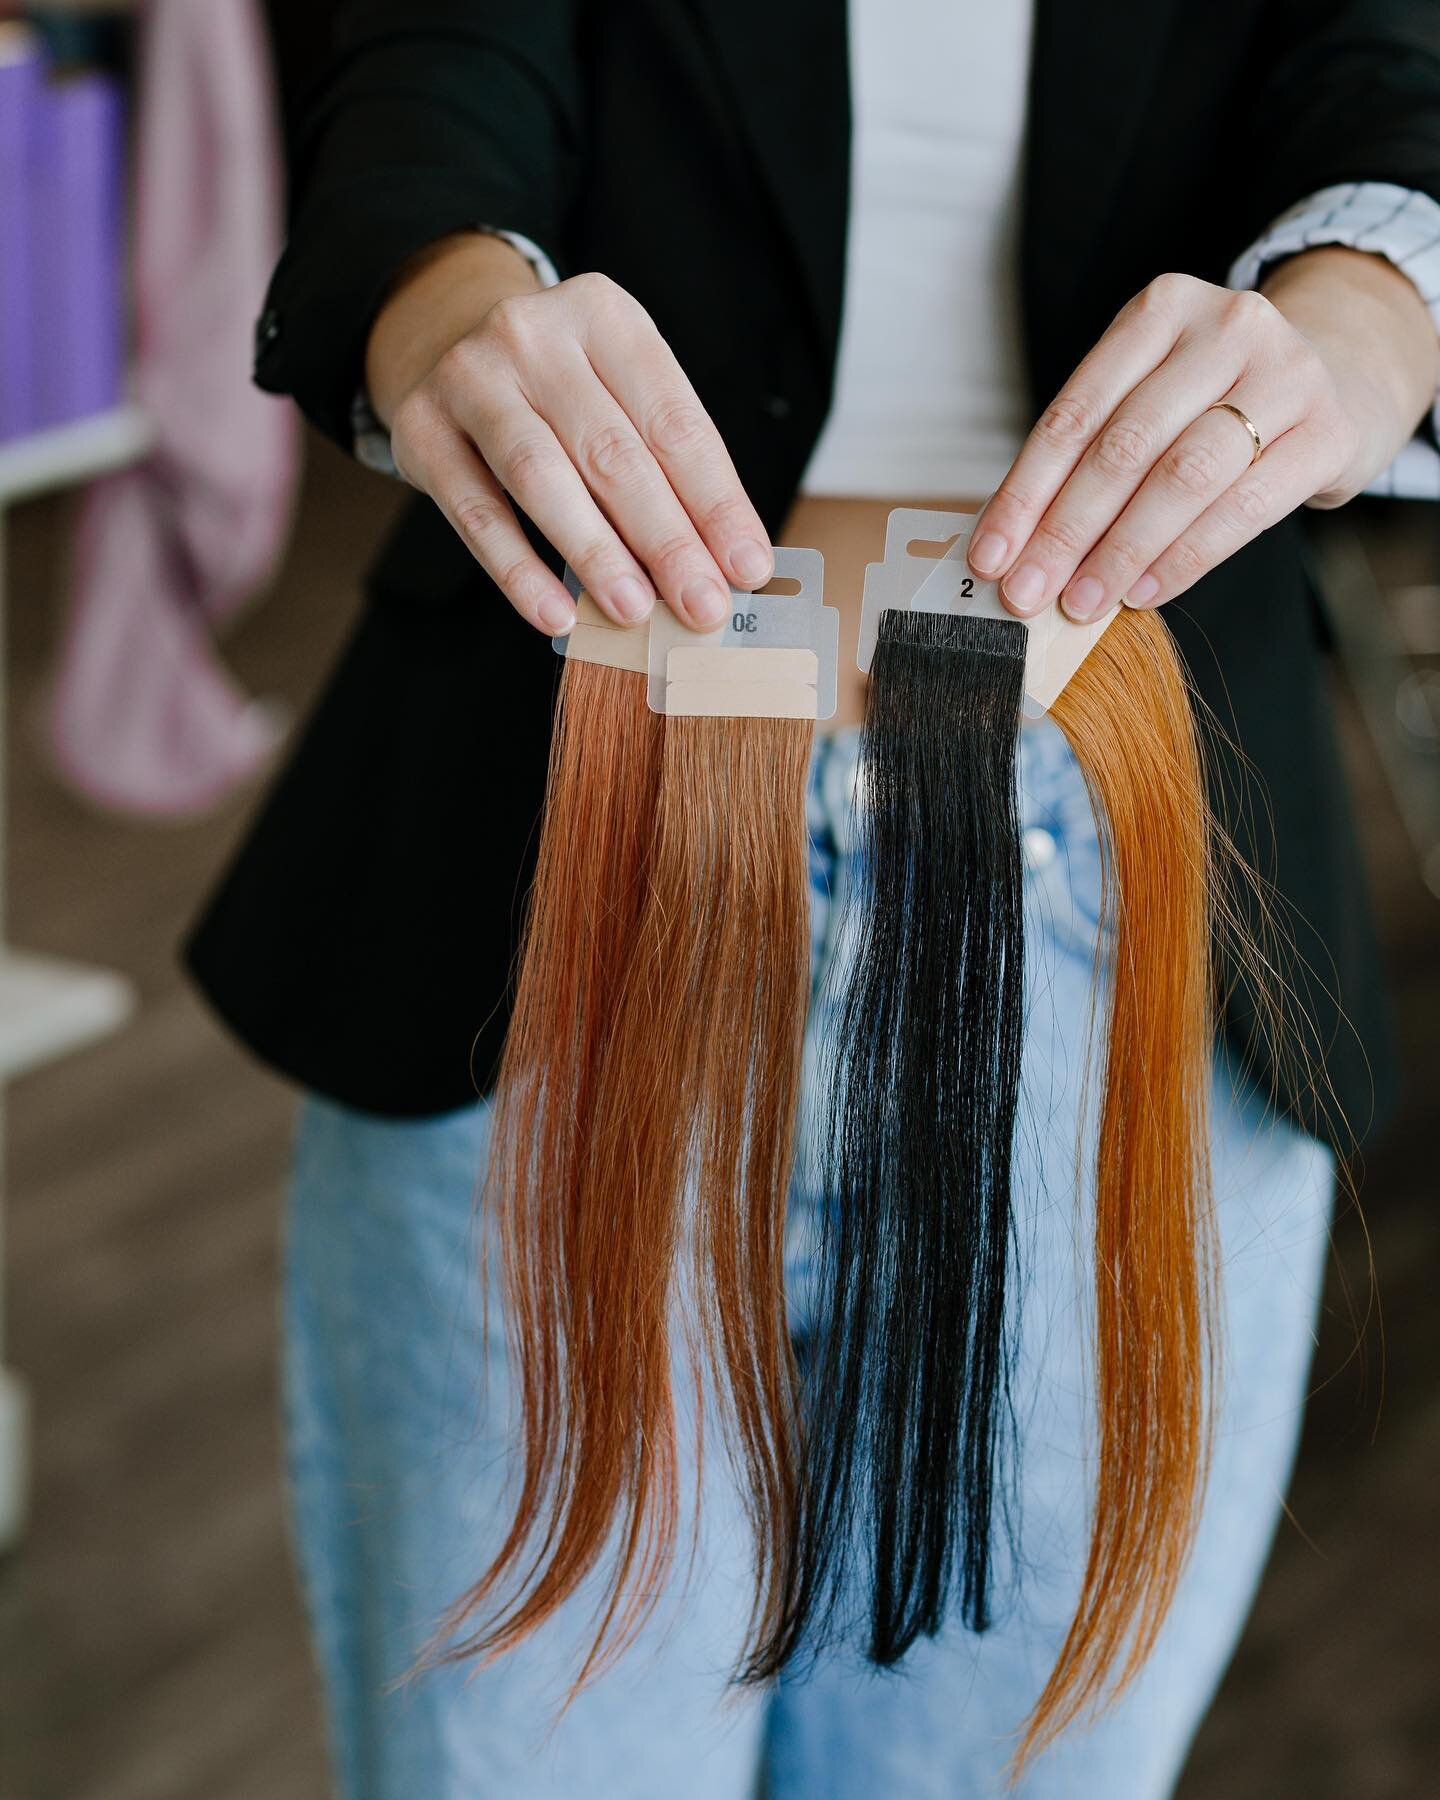 With so many different hair styles and trends out there, it&rsquo;s hard to avoid hair envy. Try scrolling through the Instagram #hair page without being just a little bit jealous of that girl with the super cute rose gold ombre, or the one with the 